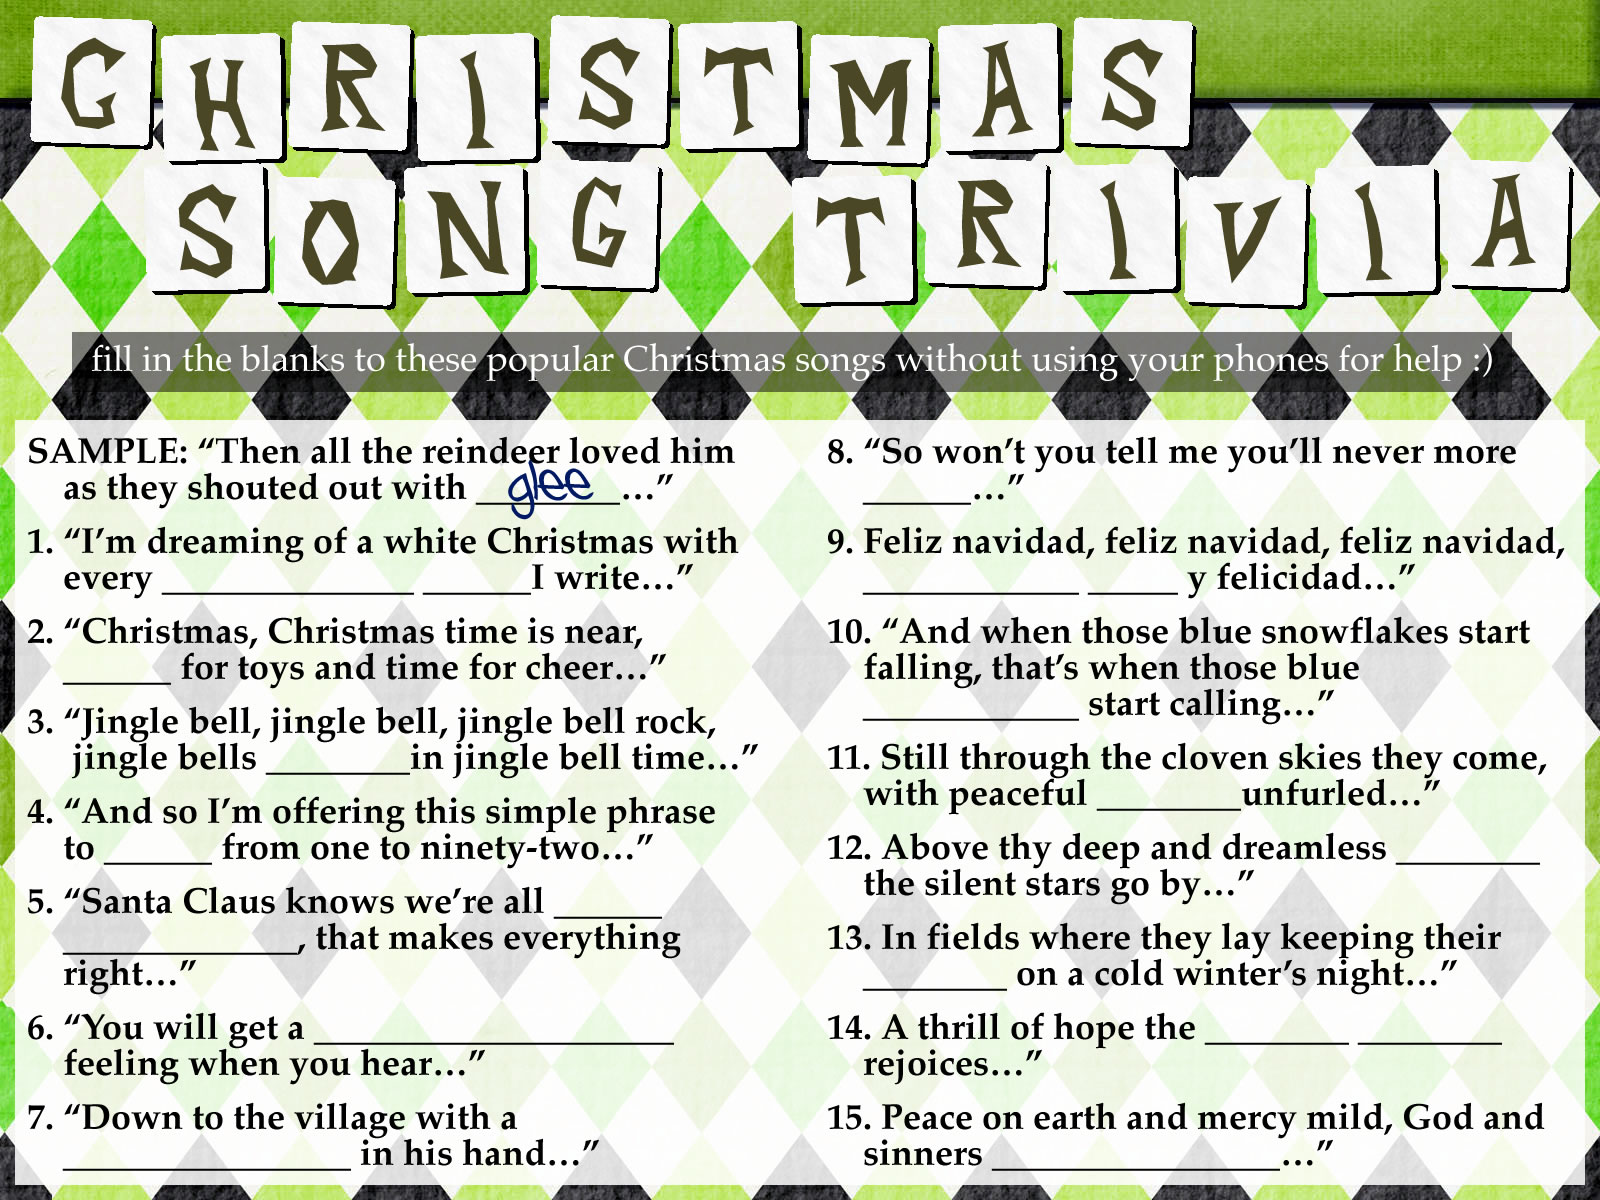 FREEBIE: Christmas Song Trivia - YouthMinistry.com